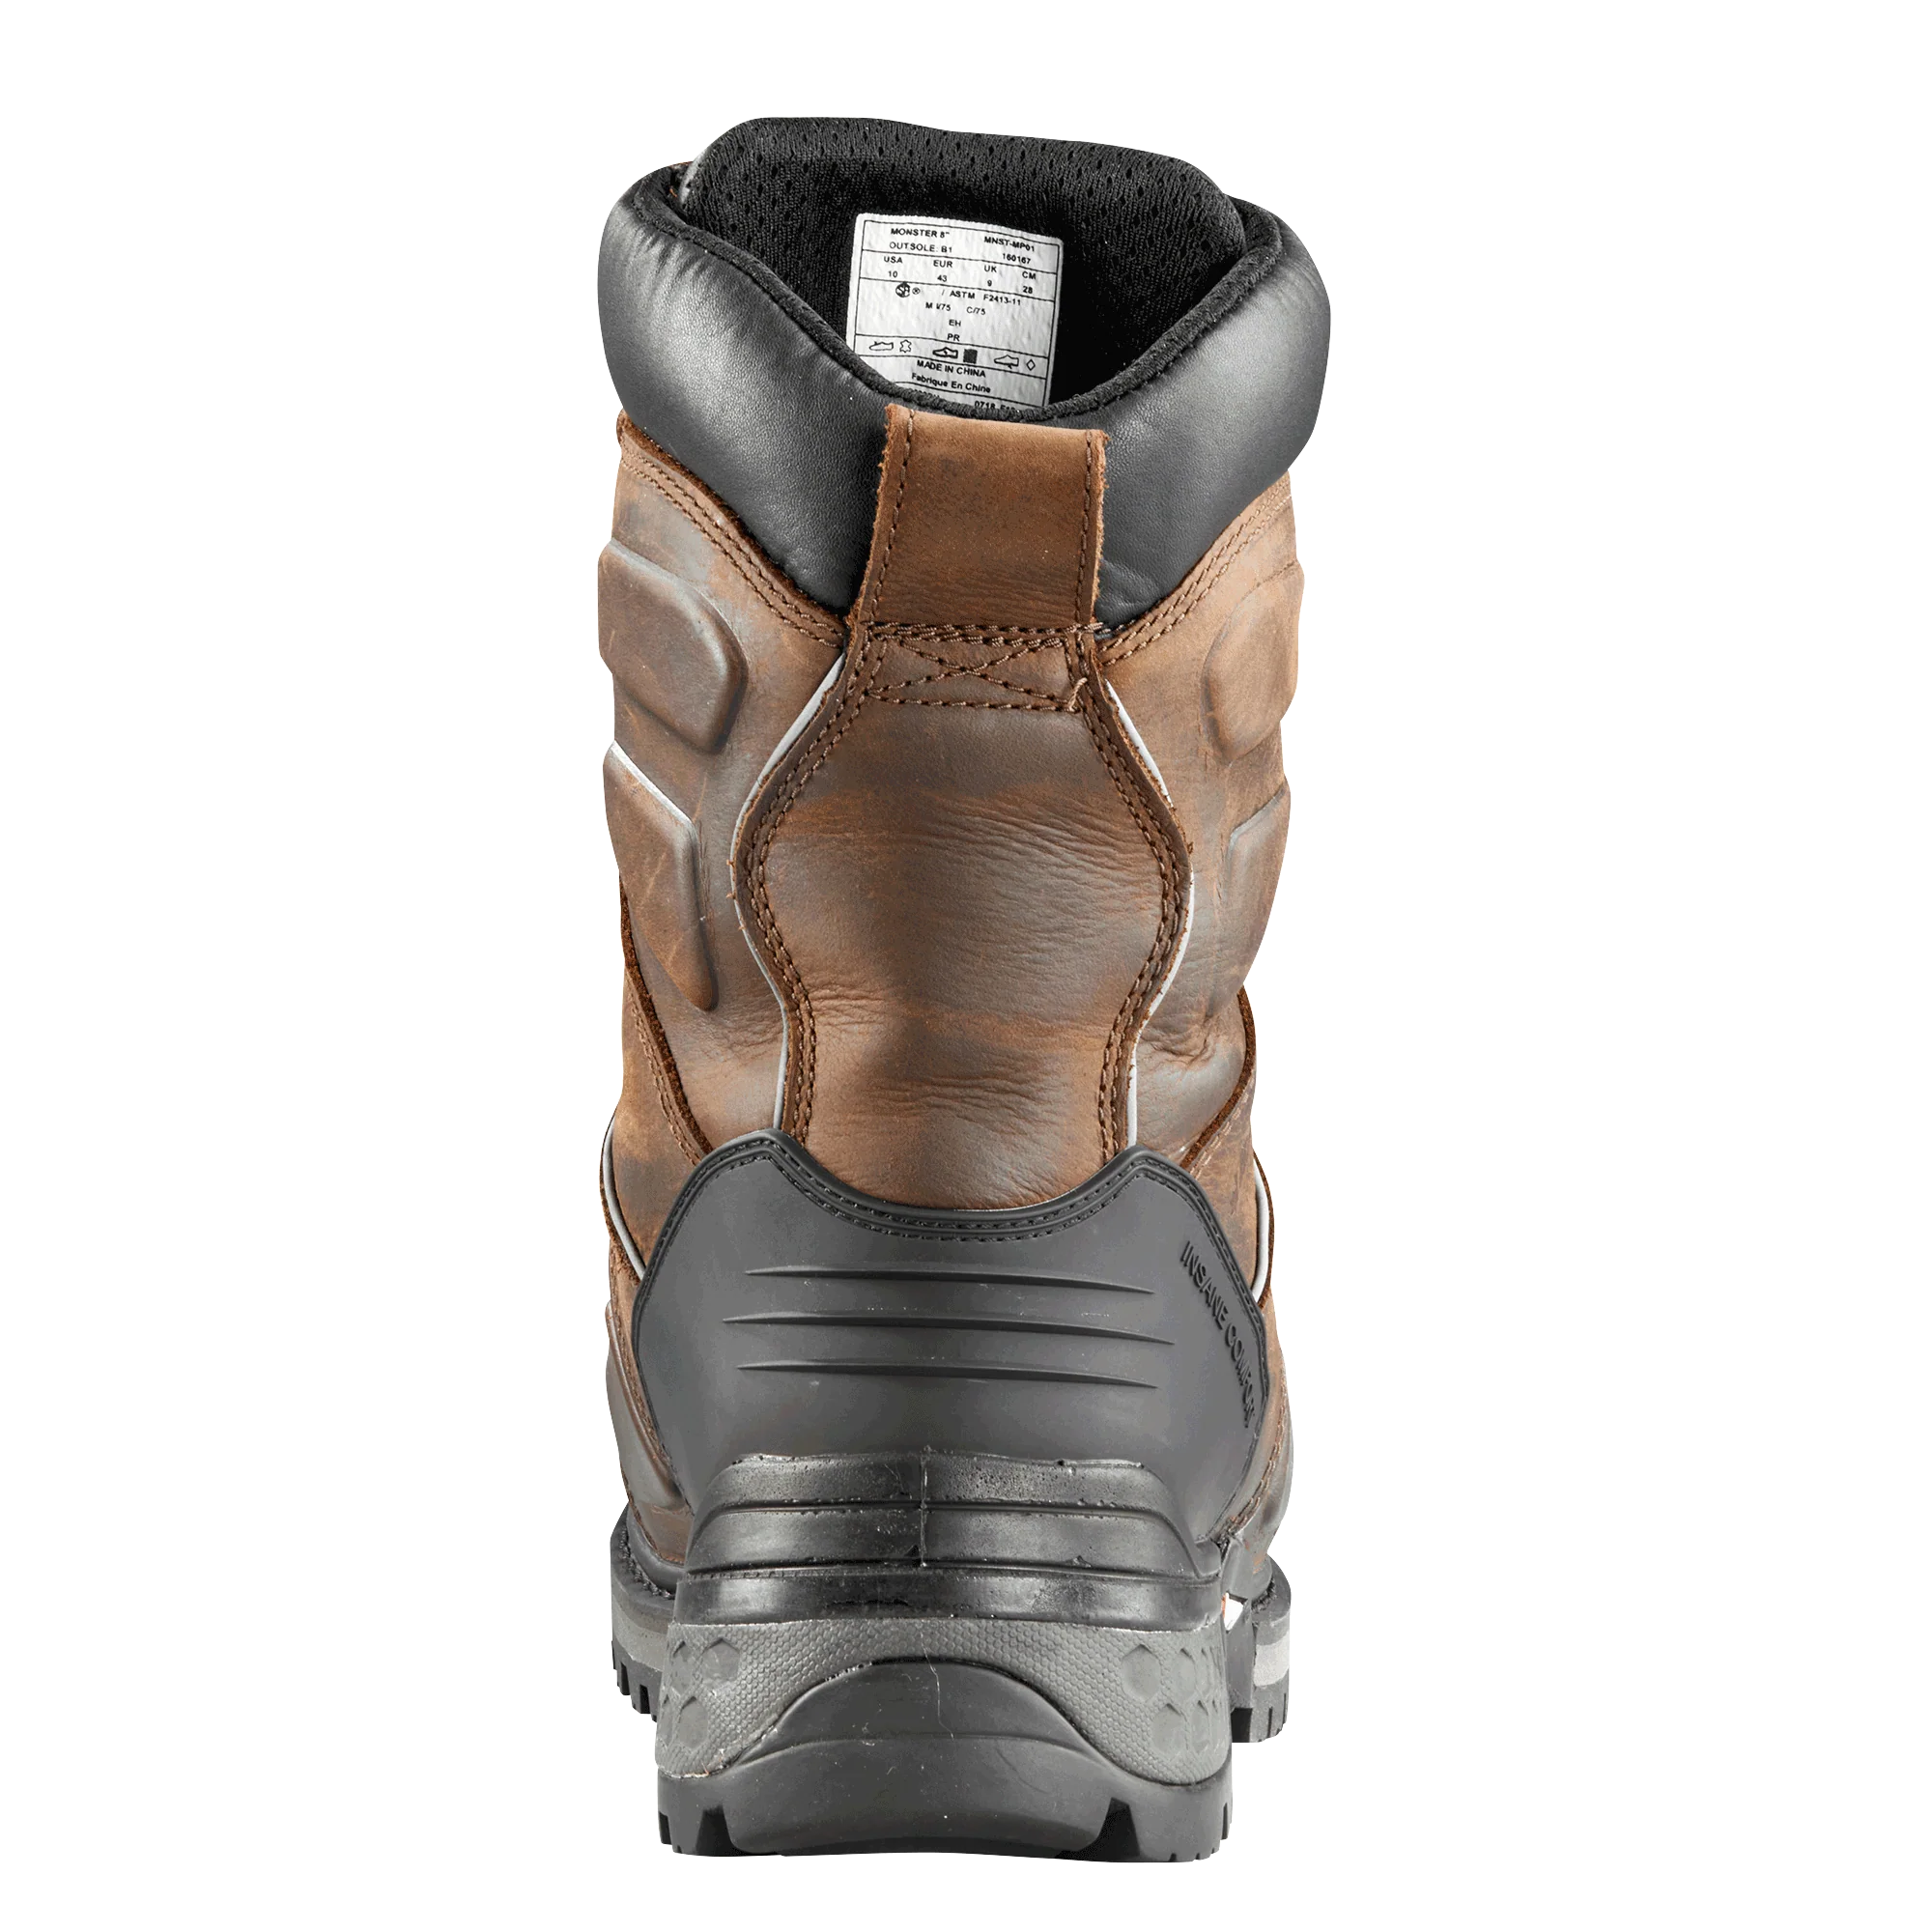 STC – Monster – Boot – #MNST-MP01 – Brown – Back